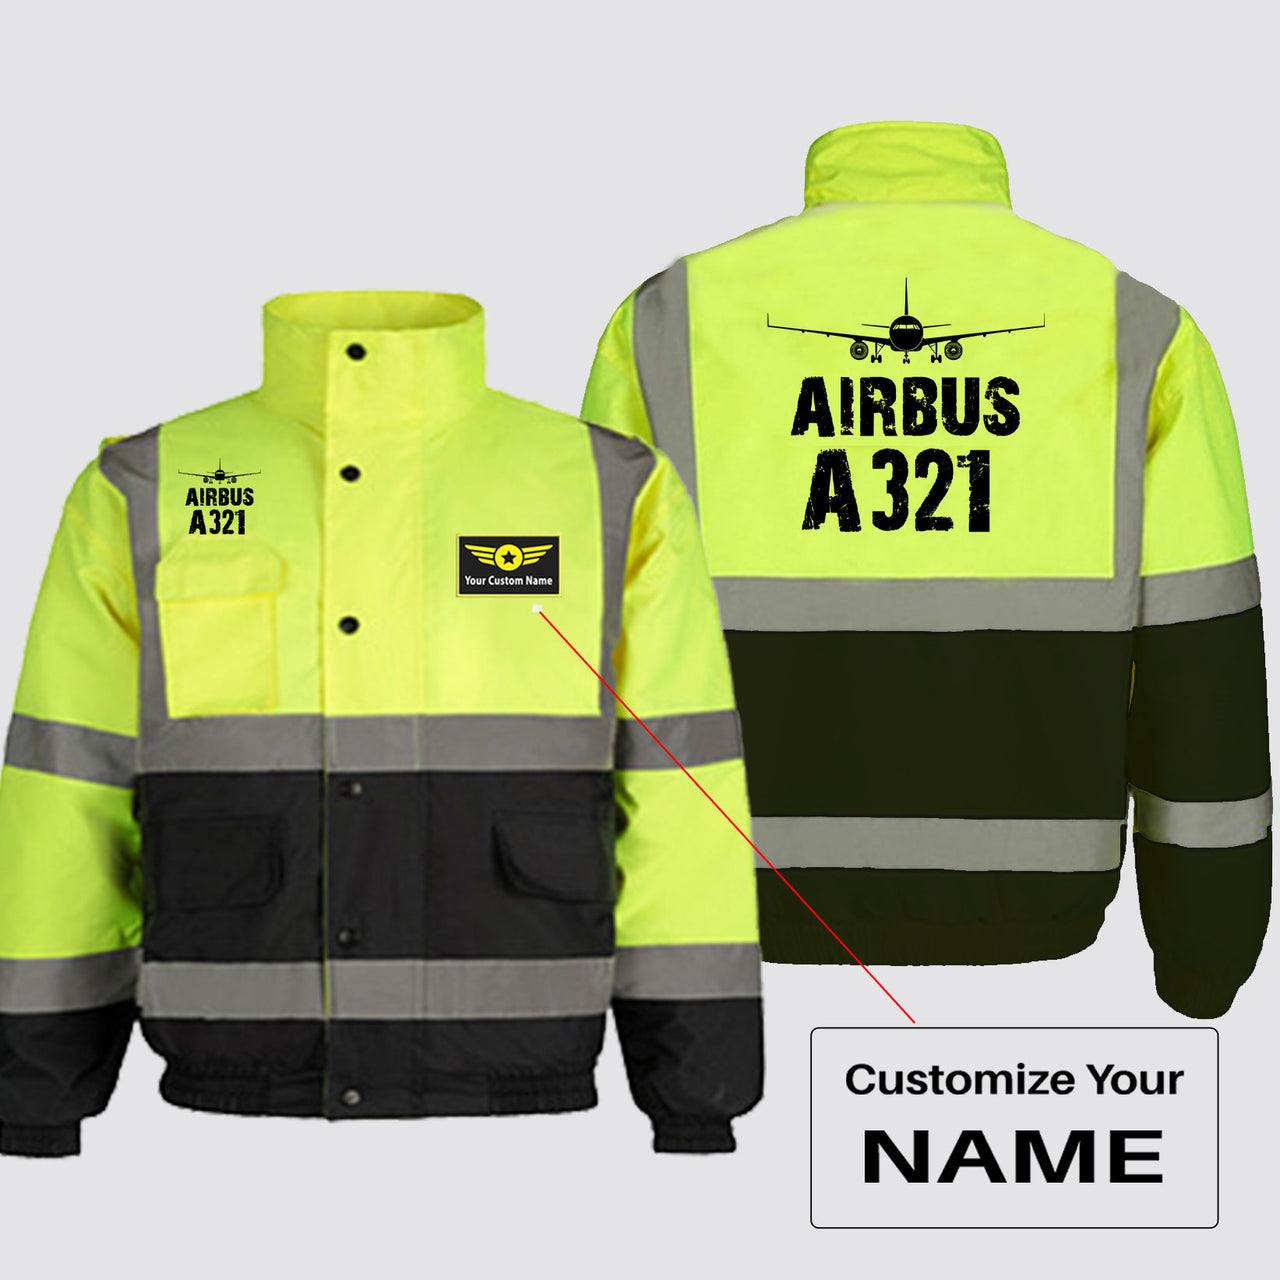 Airbus A321 & Plane Designed Reflective Winter Jackets